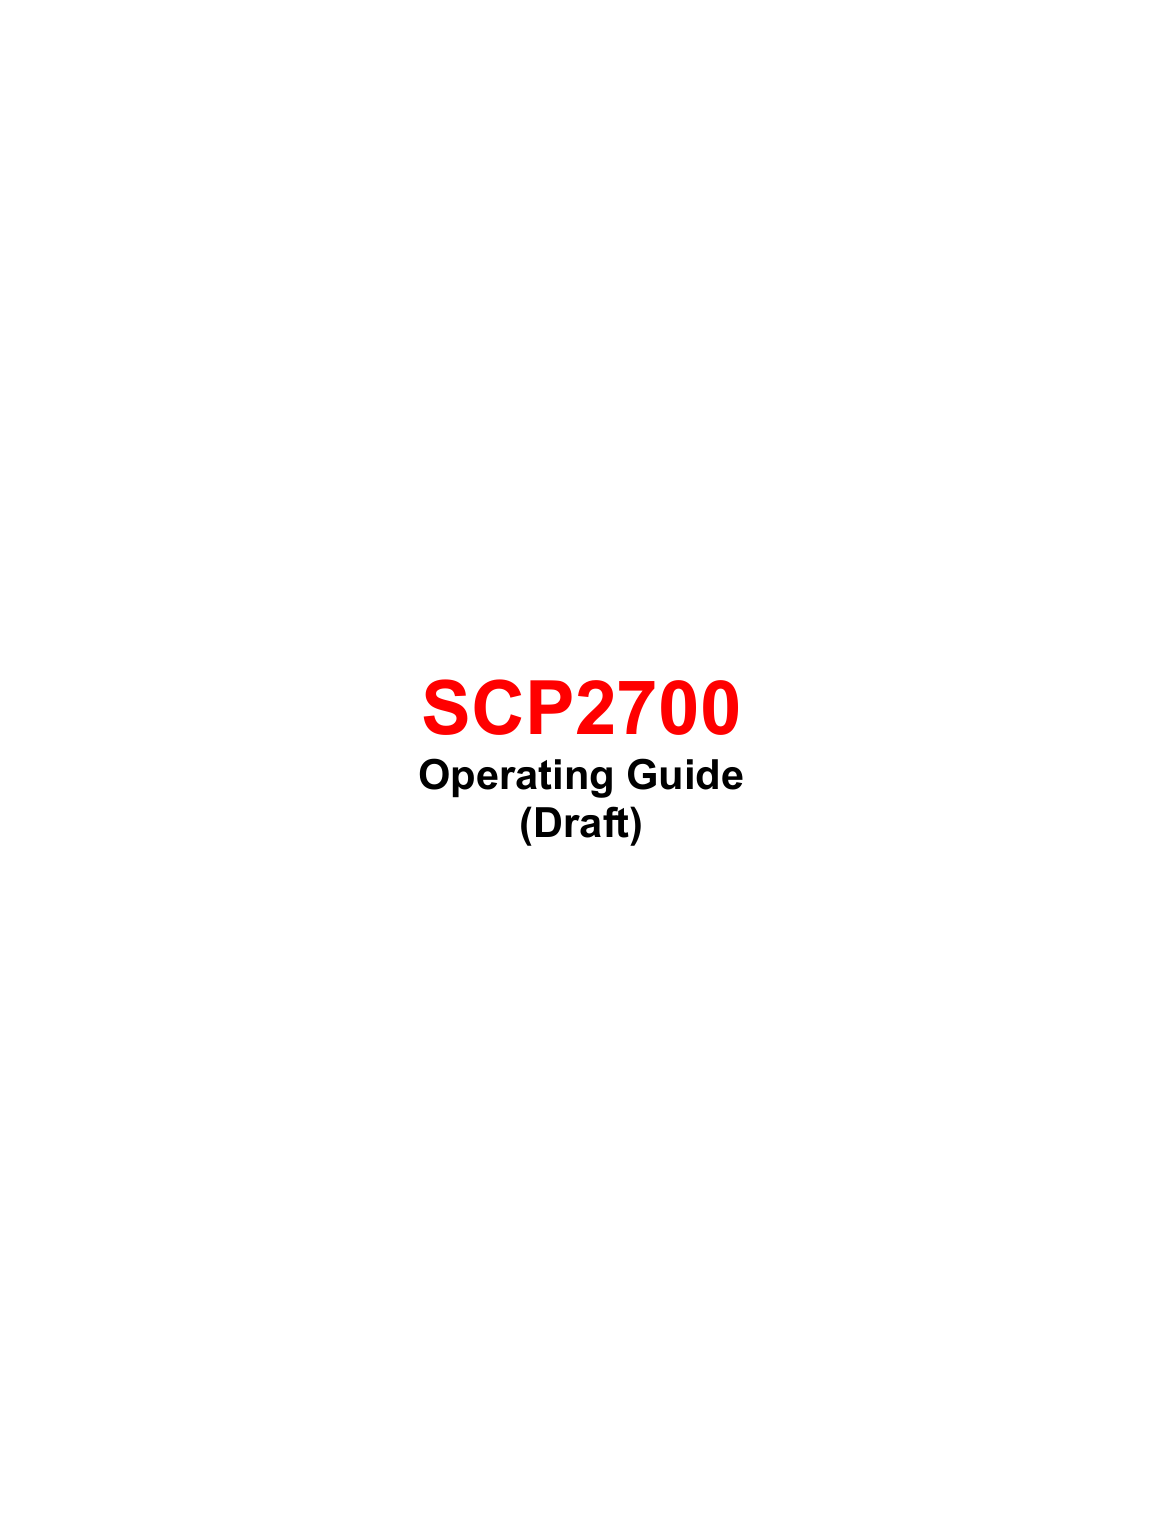                   SCP2700 Operating Guide (Draft) 